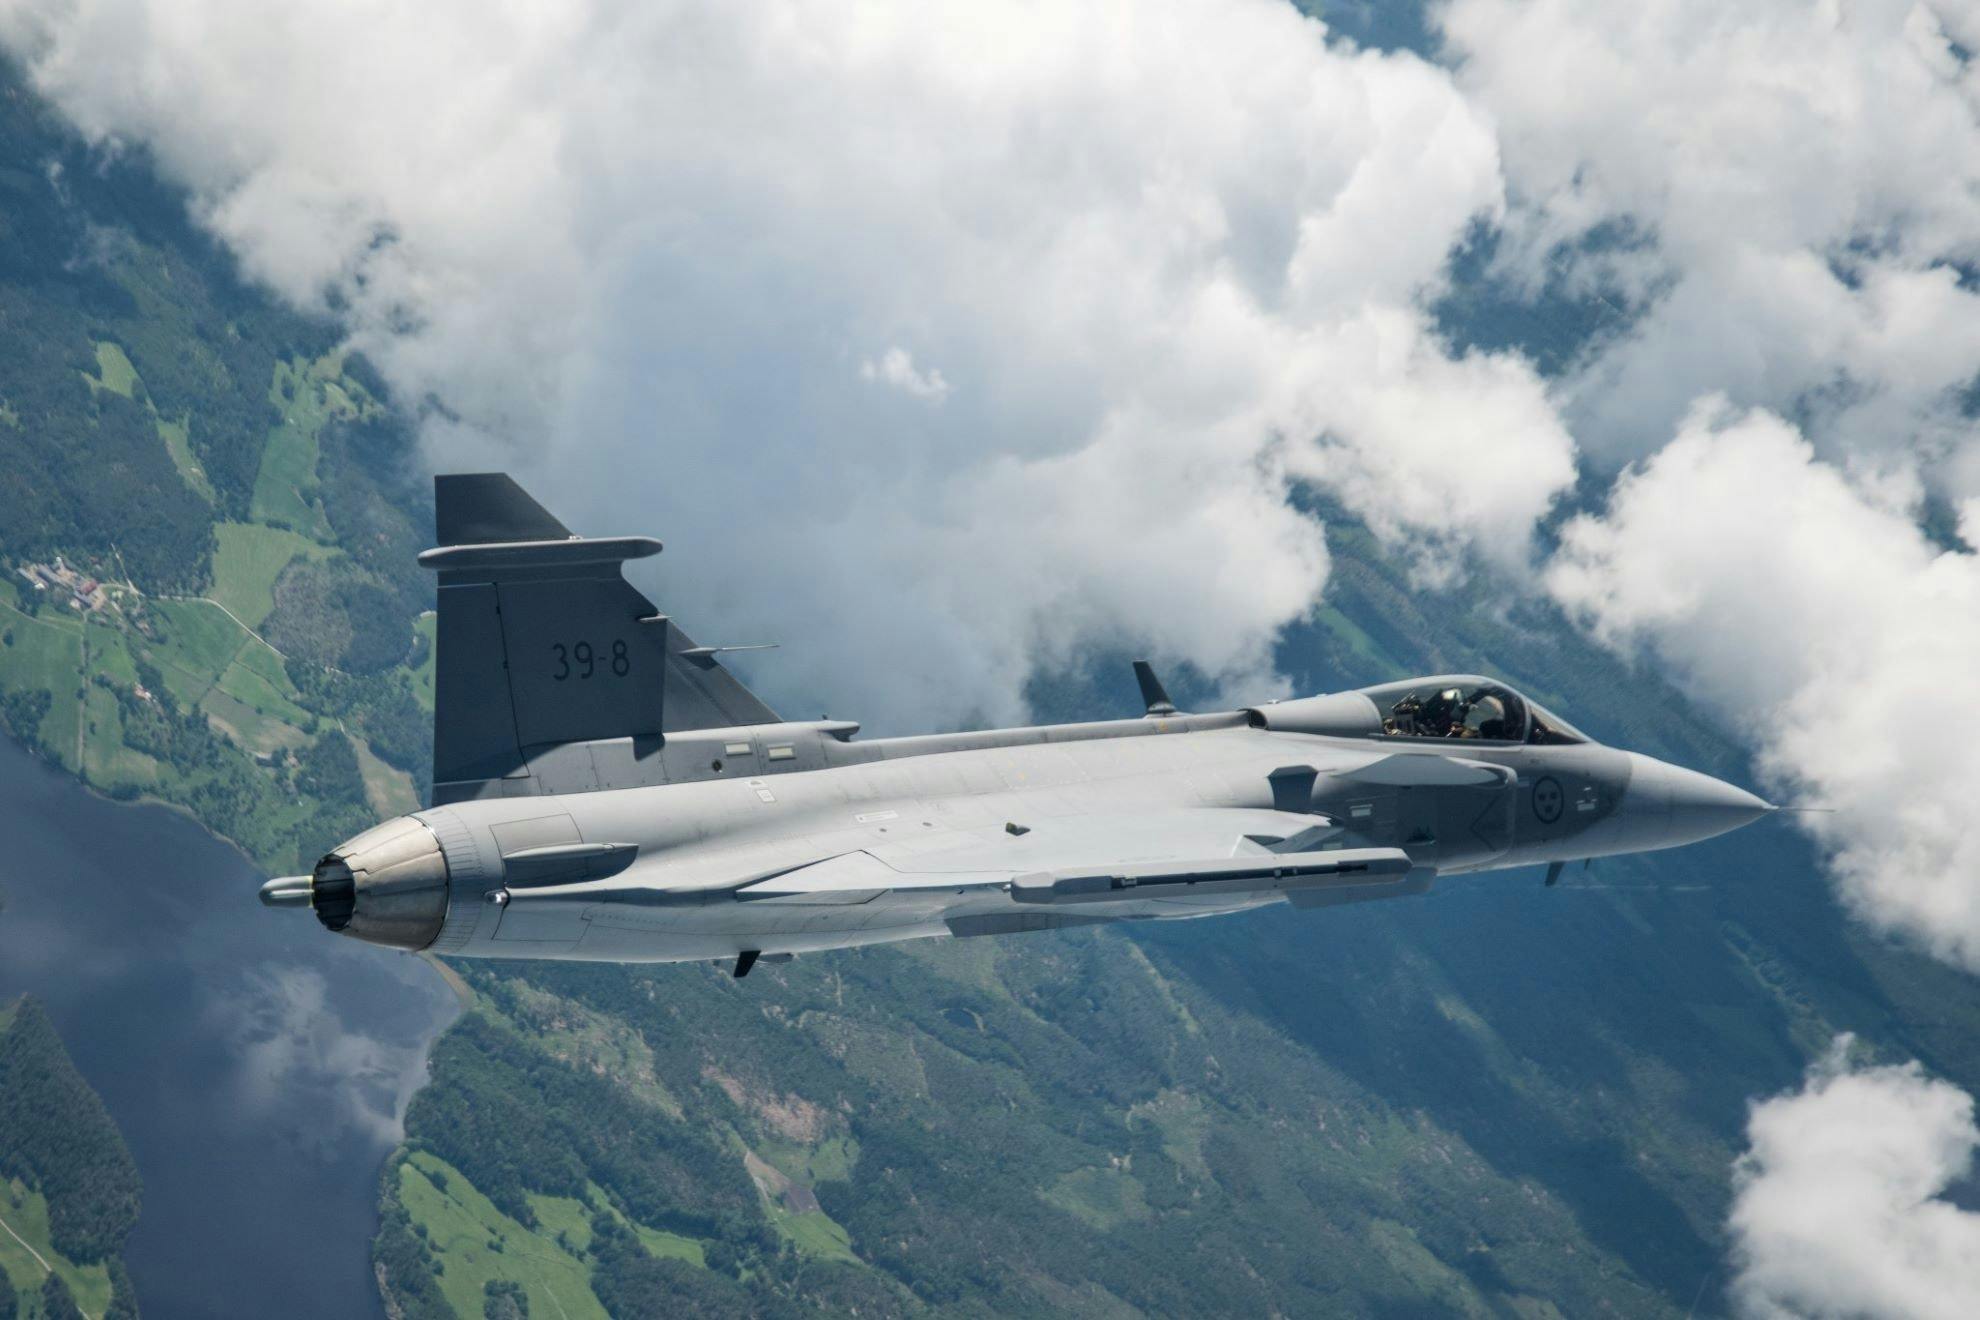 Saab's Gripen E fighter jet takes flight for the first time